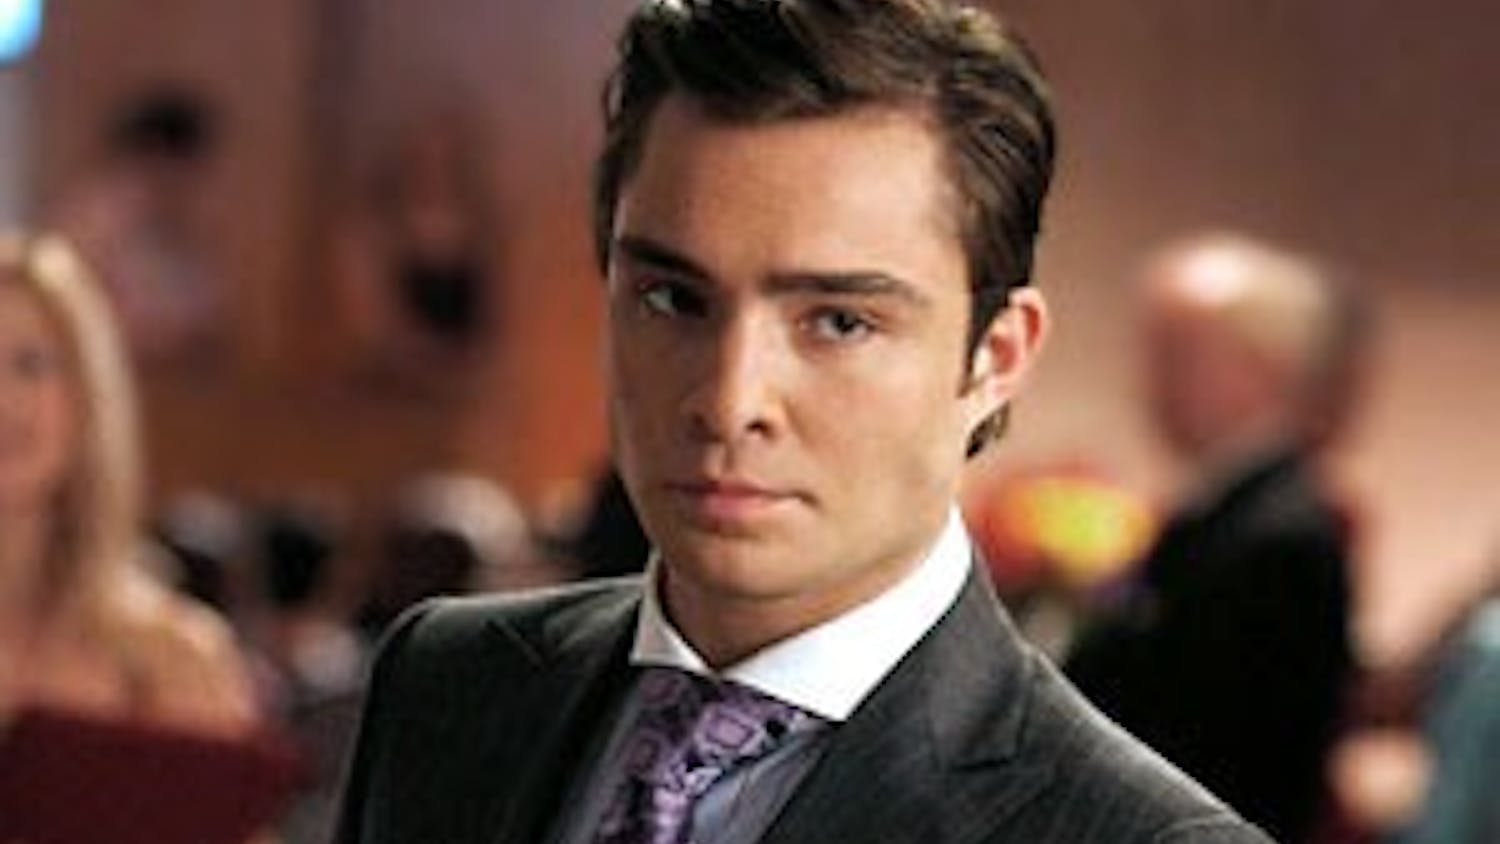 Infamous bad boy Chuck Bass always knew what he wanted and how to dress to get it.